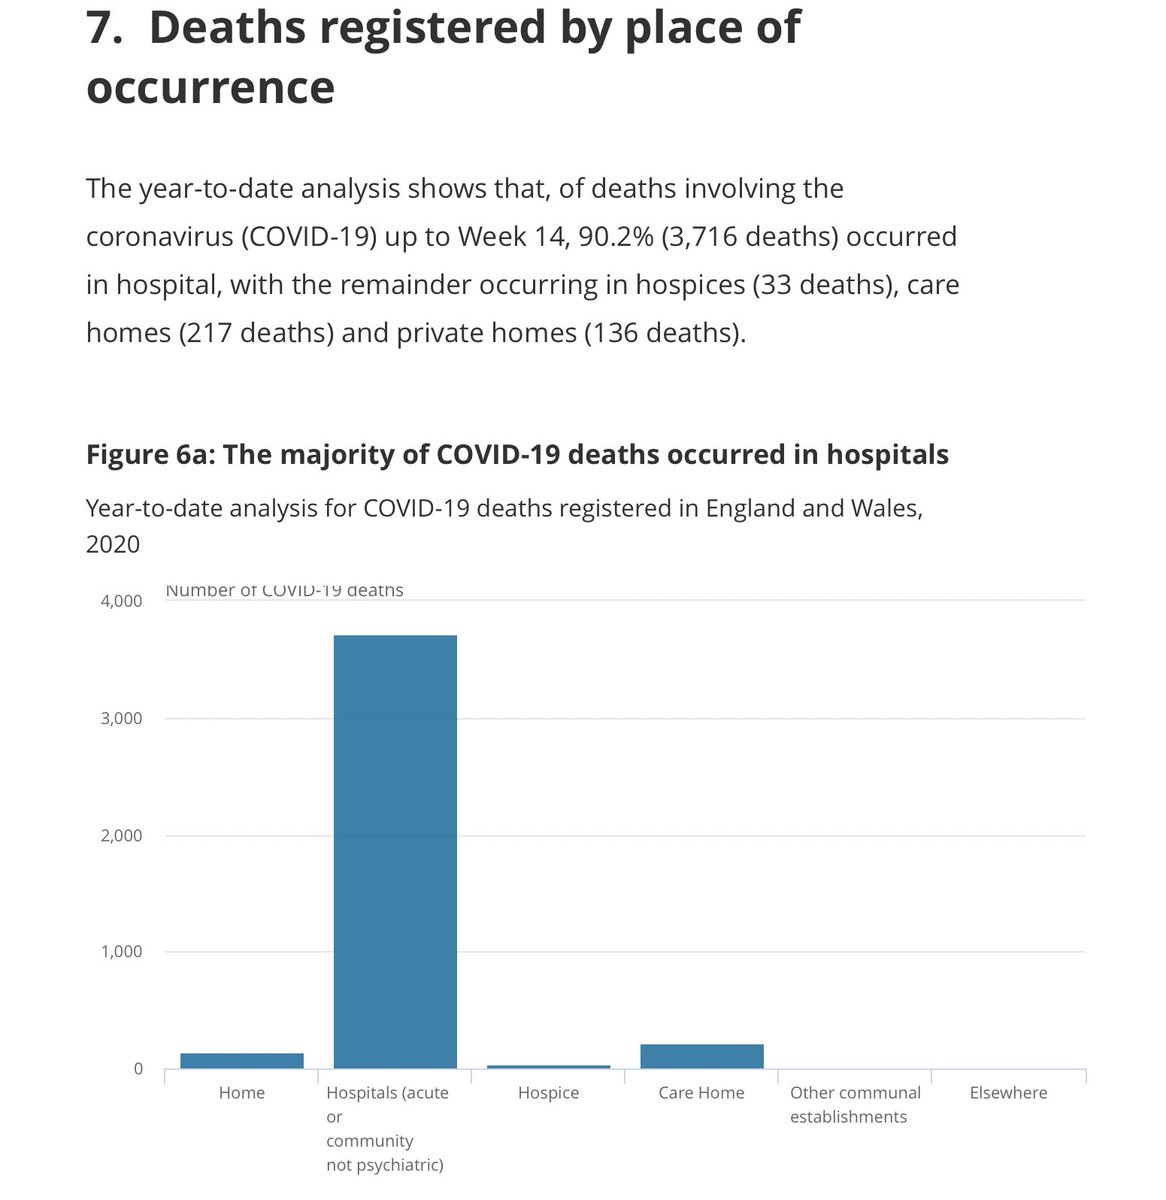 On the care home deaths, the new ONS stats till April 3rd are that 217 deaths from COVID-19 occurred in care homes, 136 in private homes, and 33 in hospices... versus 3,716 in hospitals....so that is far lower than normal pattern from all cause mortality..